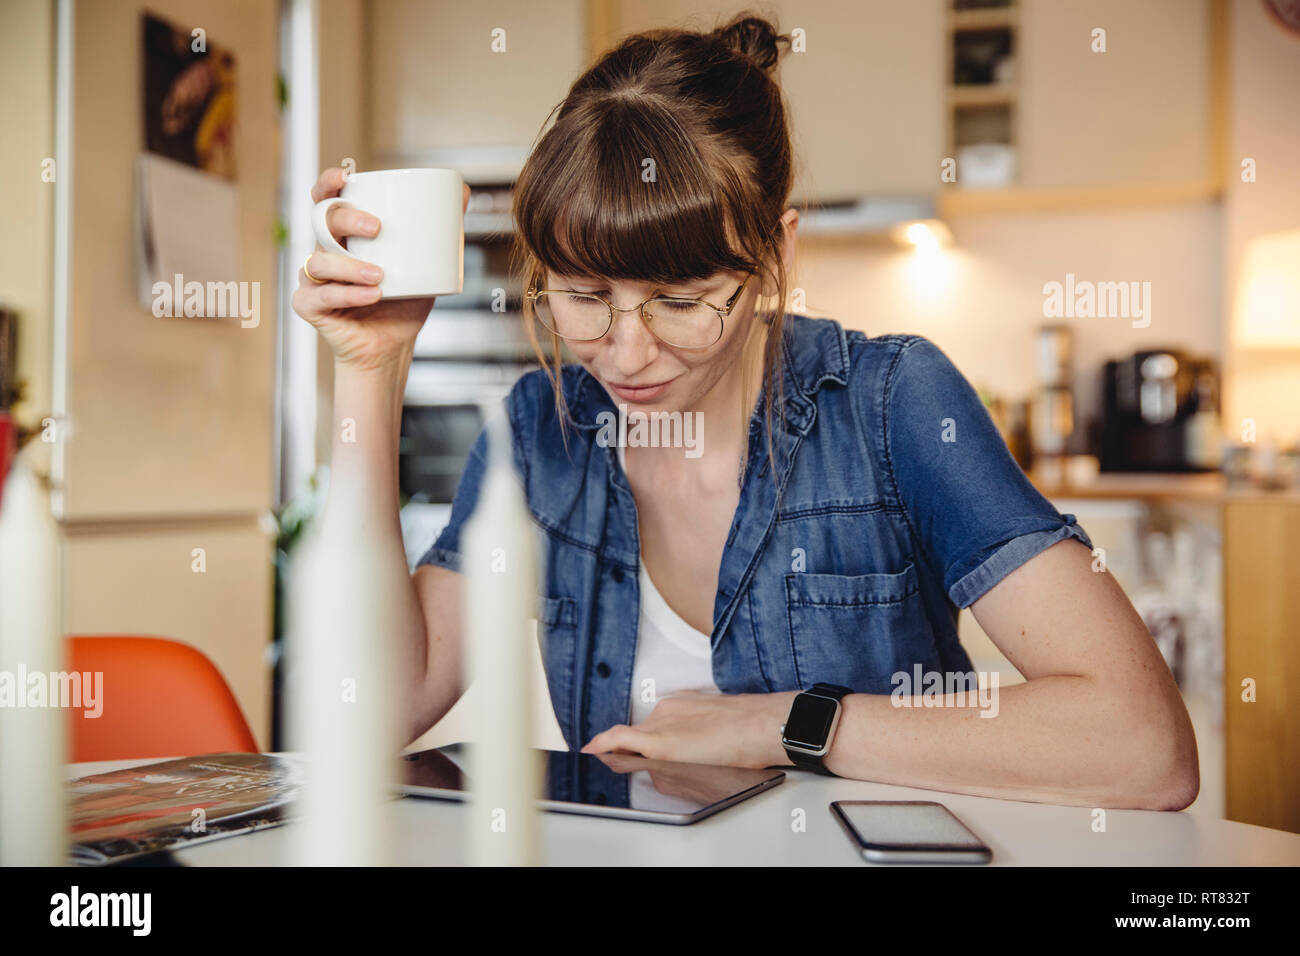 Woman sitting with cup of coffee at table in the kitchen using tablet Stock Photo